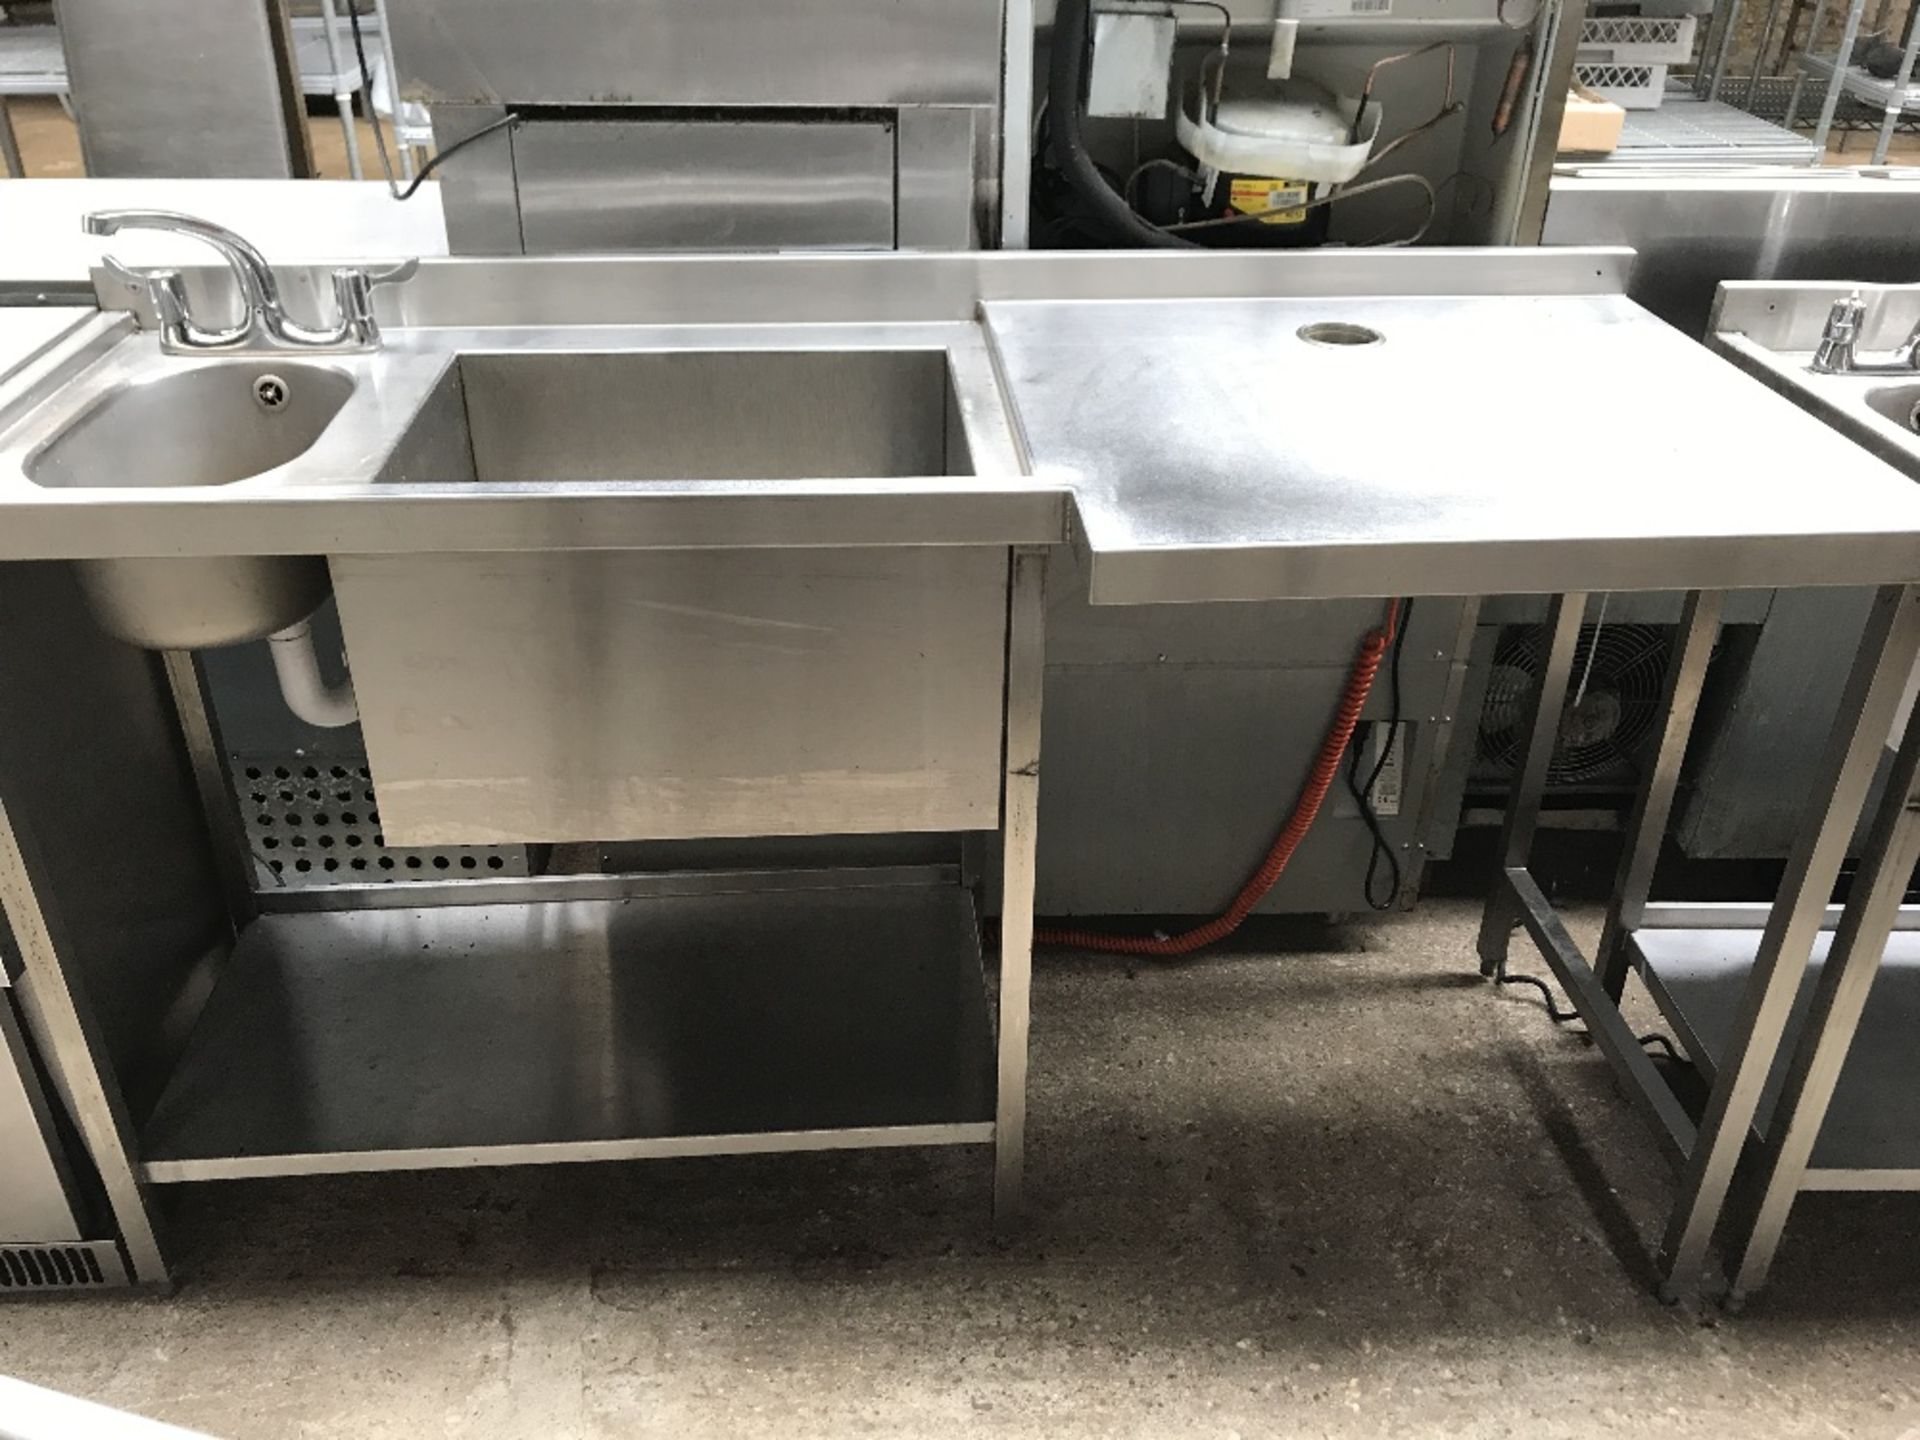 Glass/Dish wash Area with dep bowl sink, hand sink and space for appliance 1620w x 650mm deep